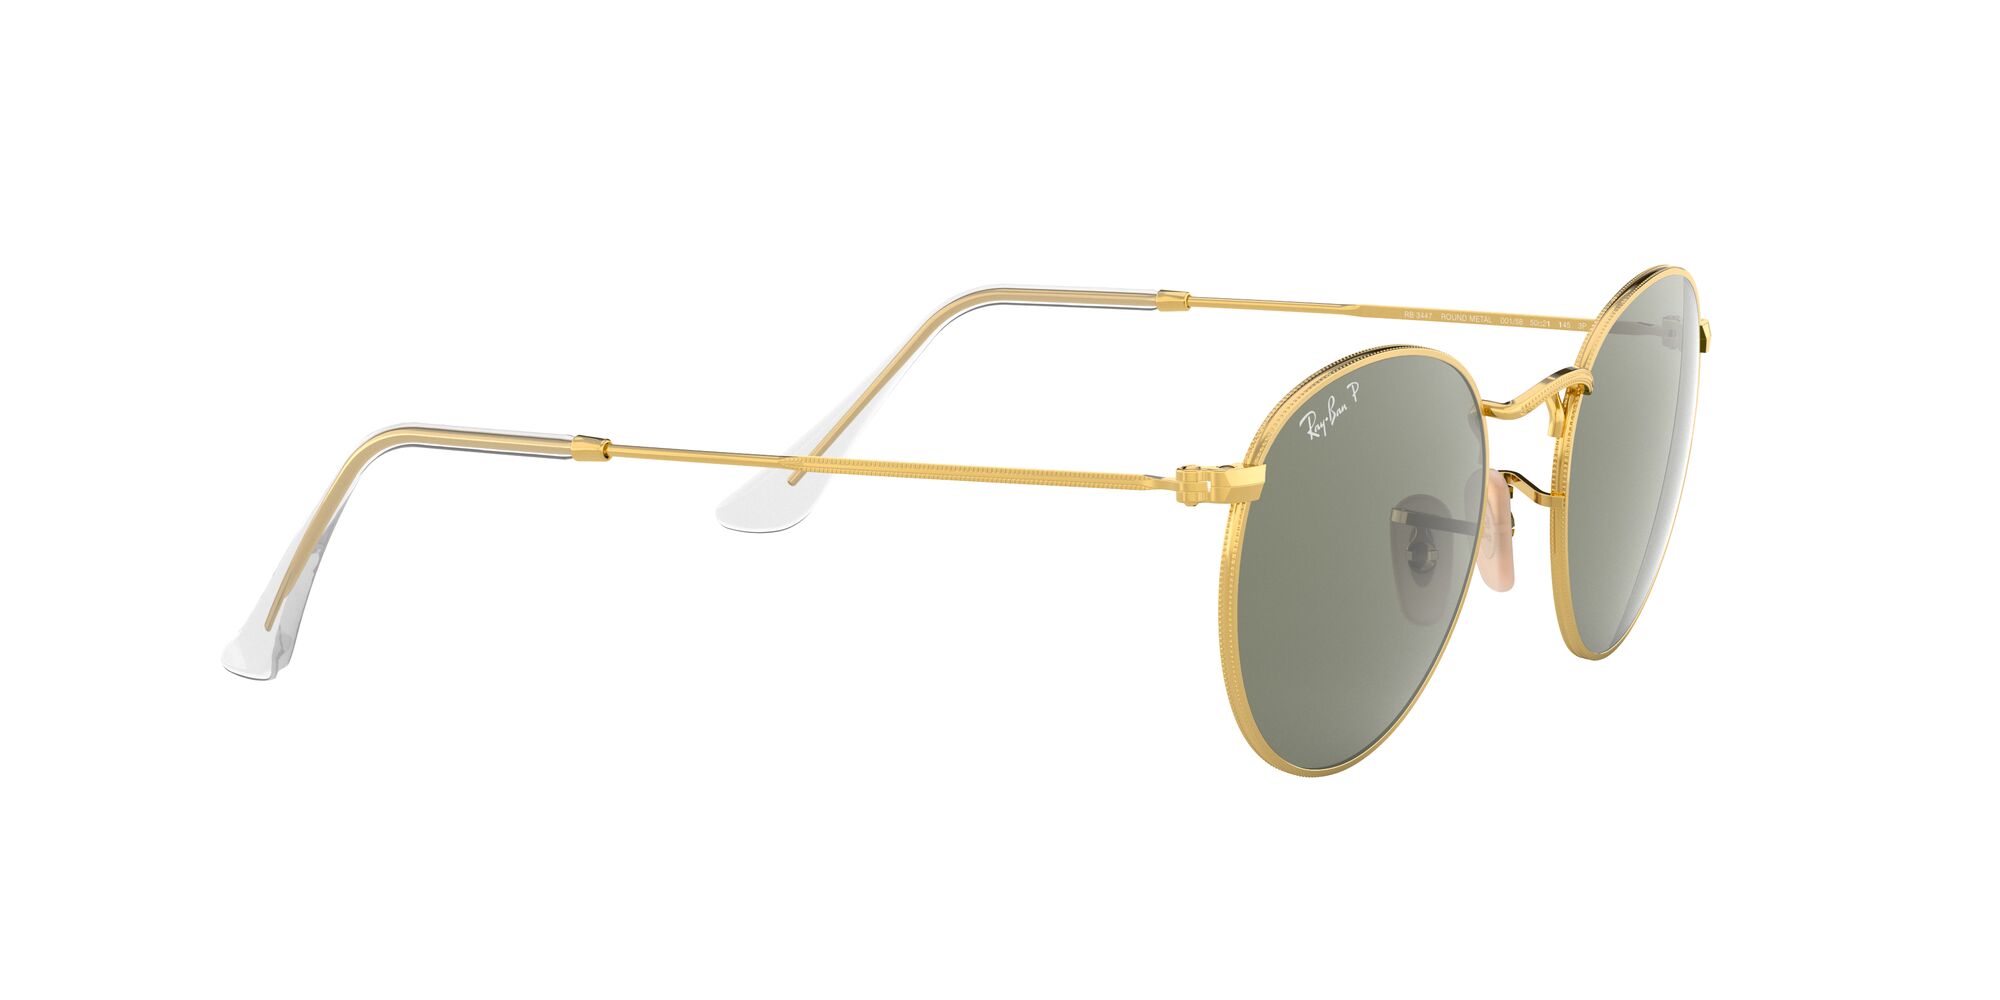 Ray-Ban RB3447 Round Metal Sunglasses - image 11 of 12